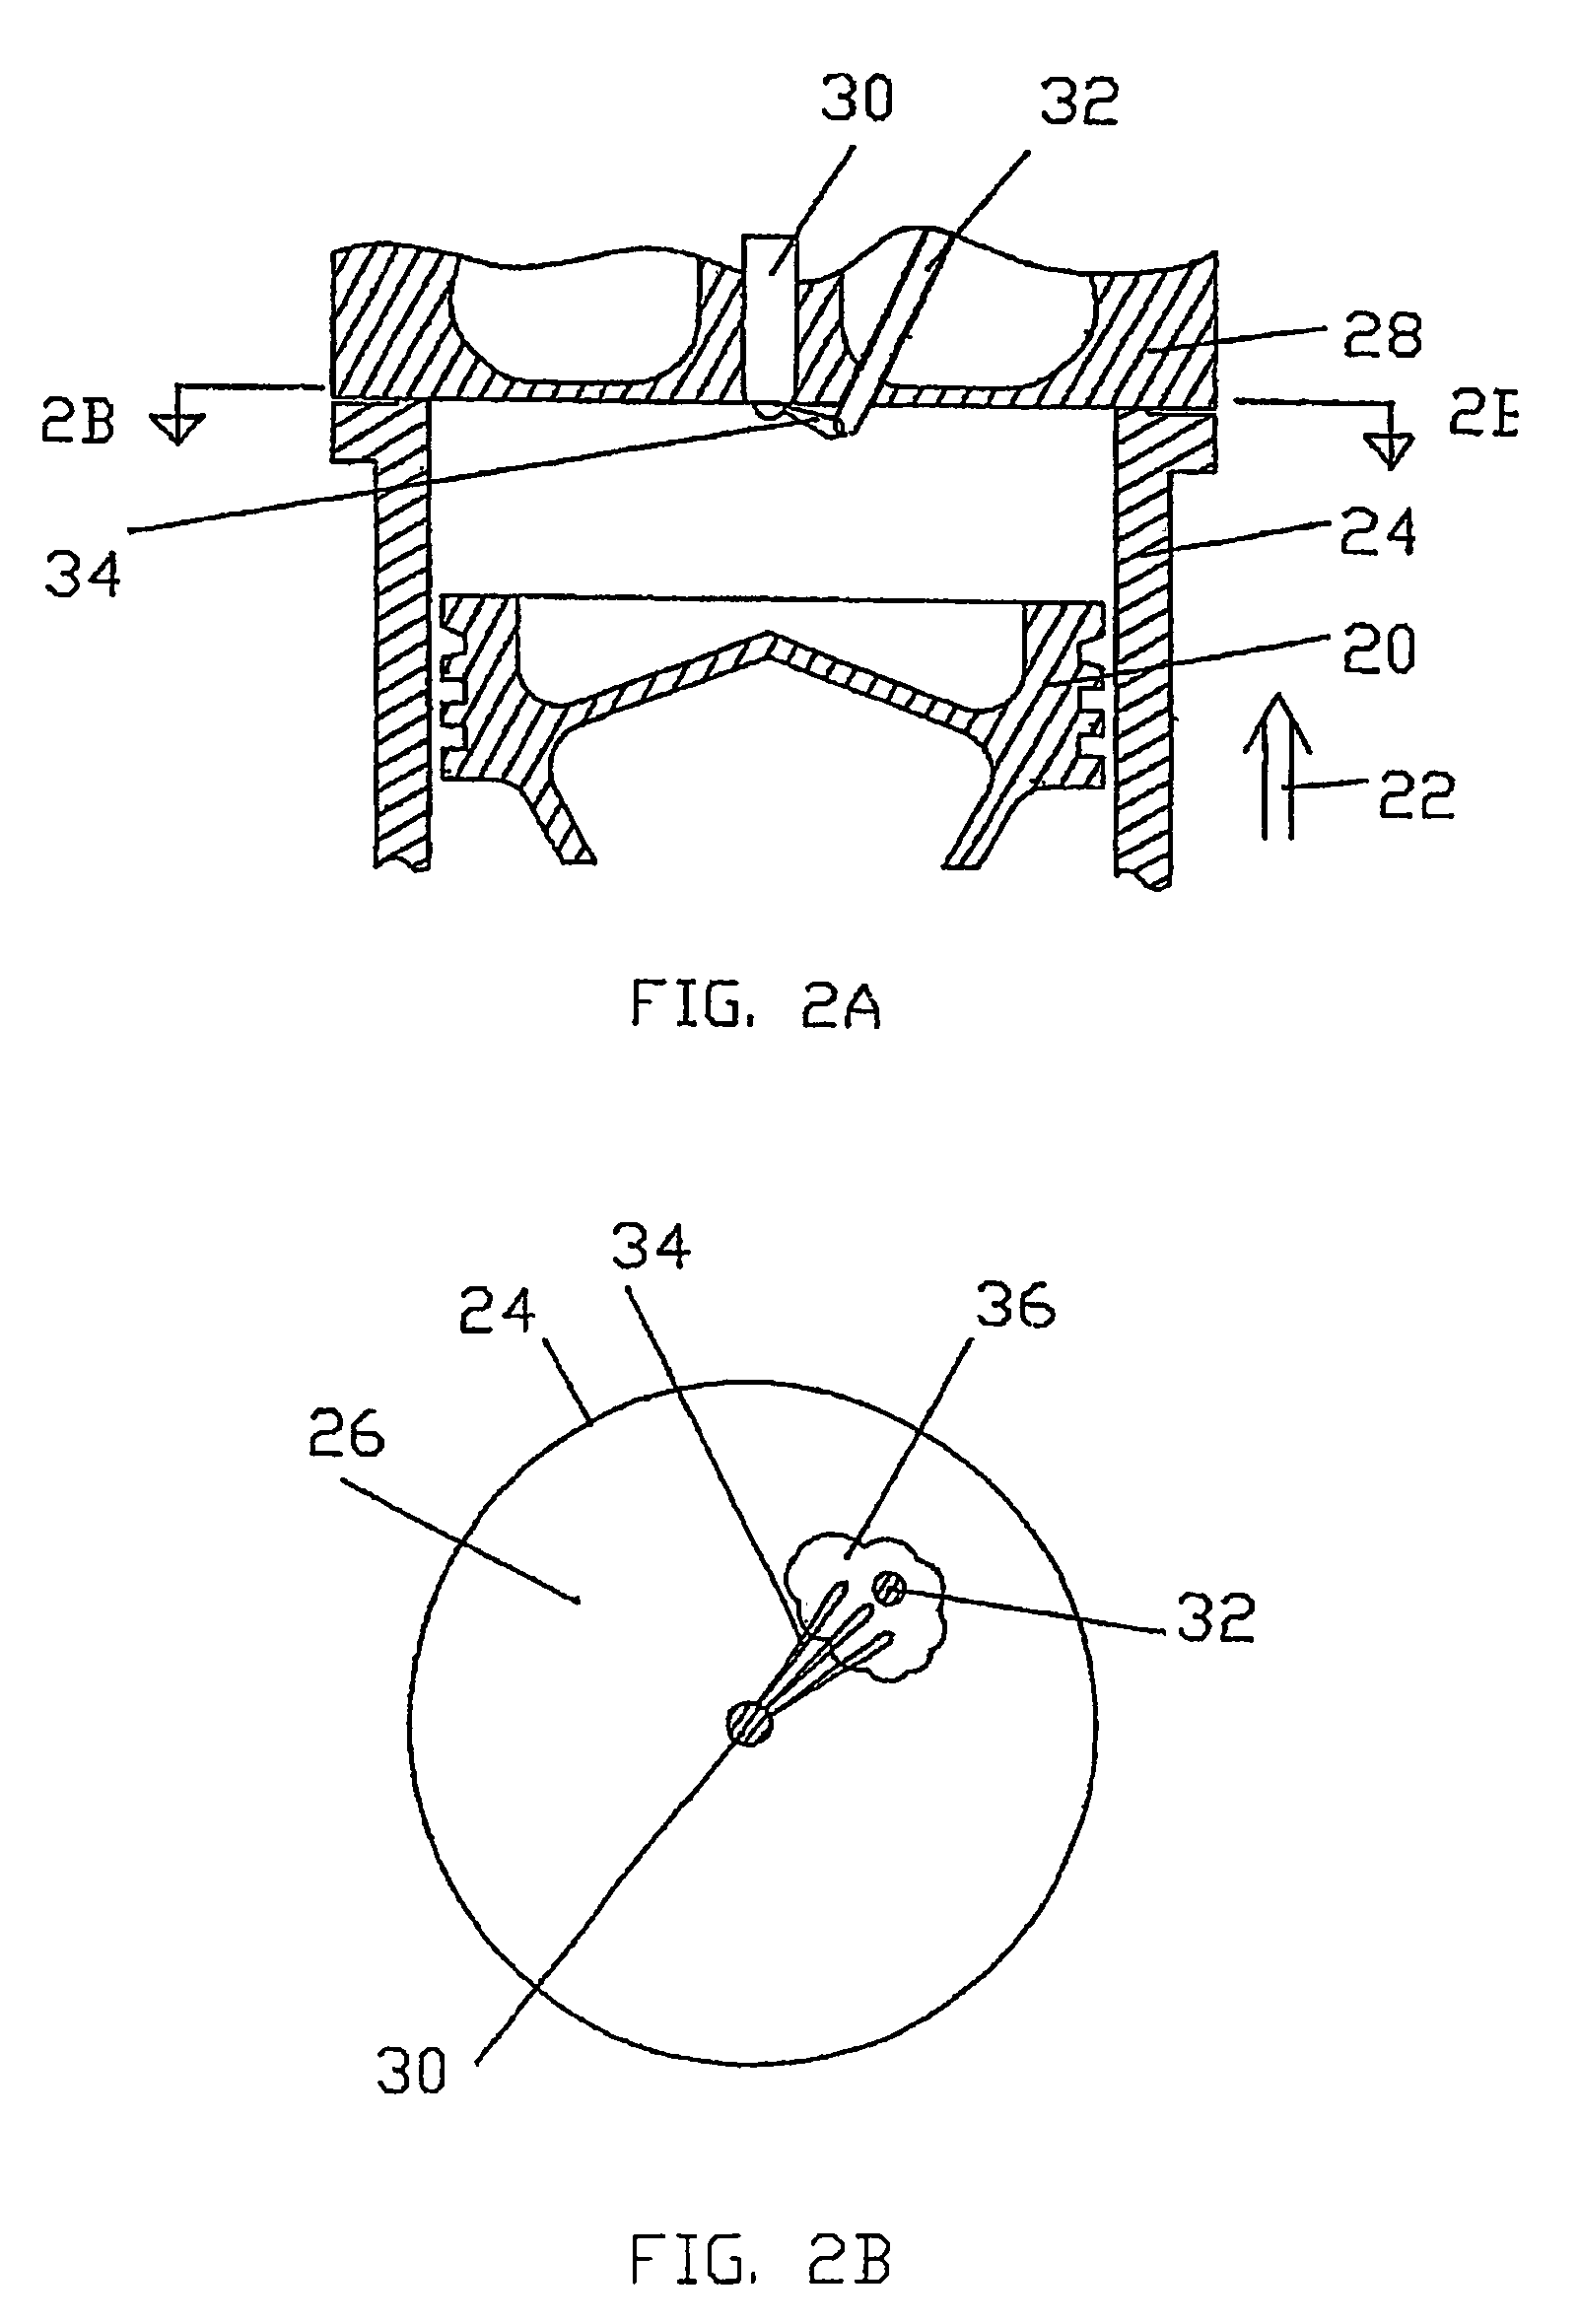 Control method and apparatus for gaseous fuelled internal combustion engine